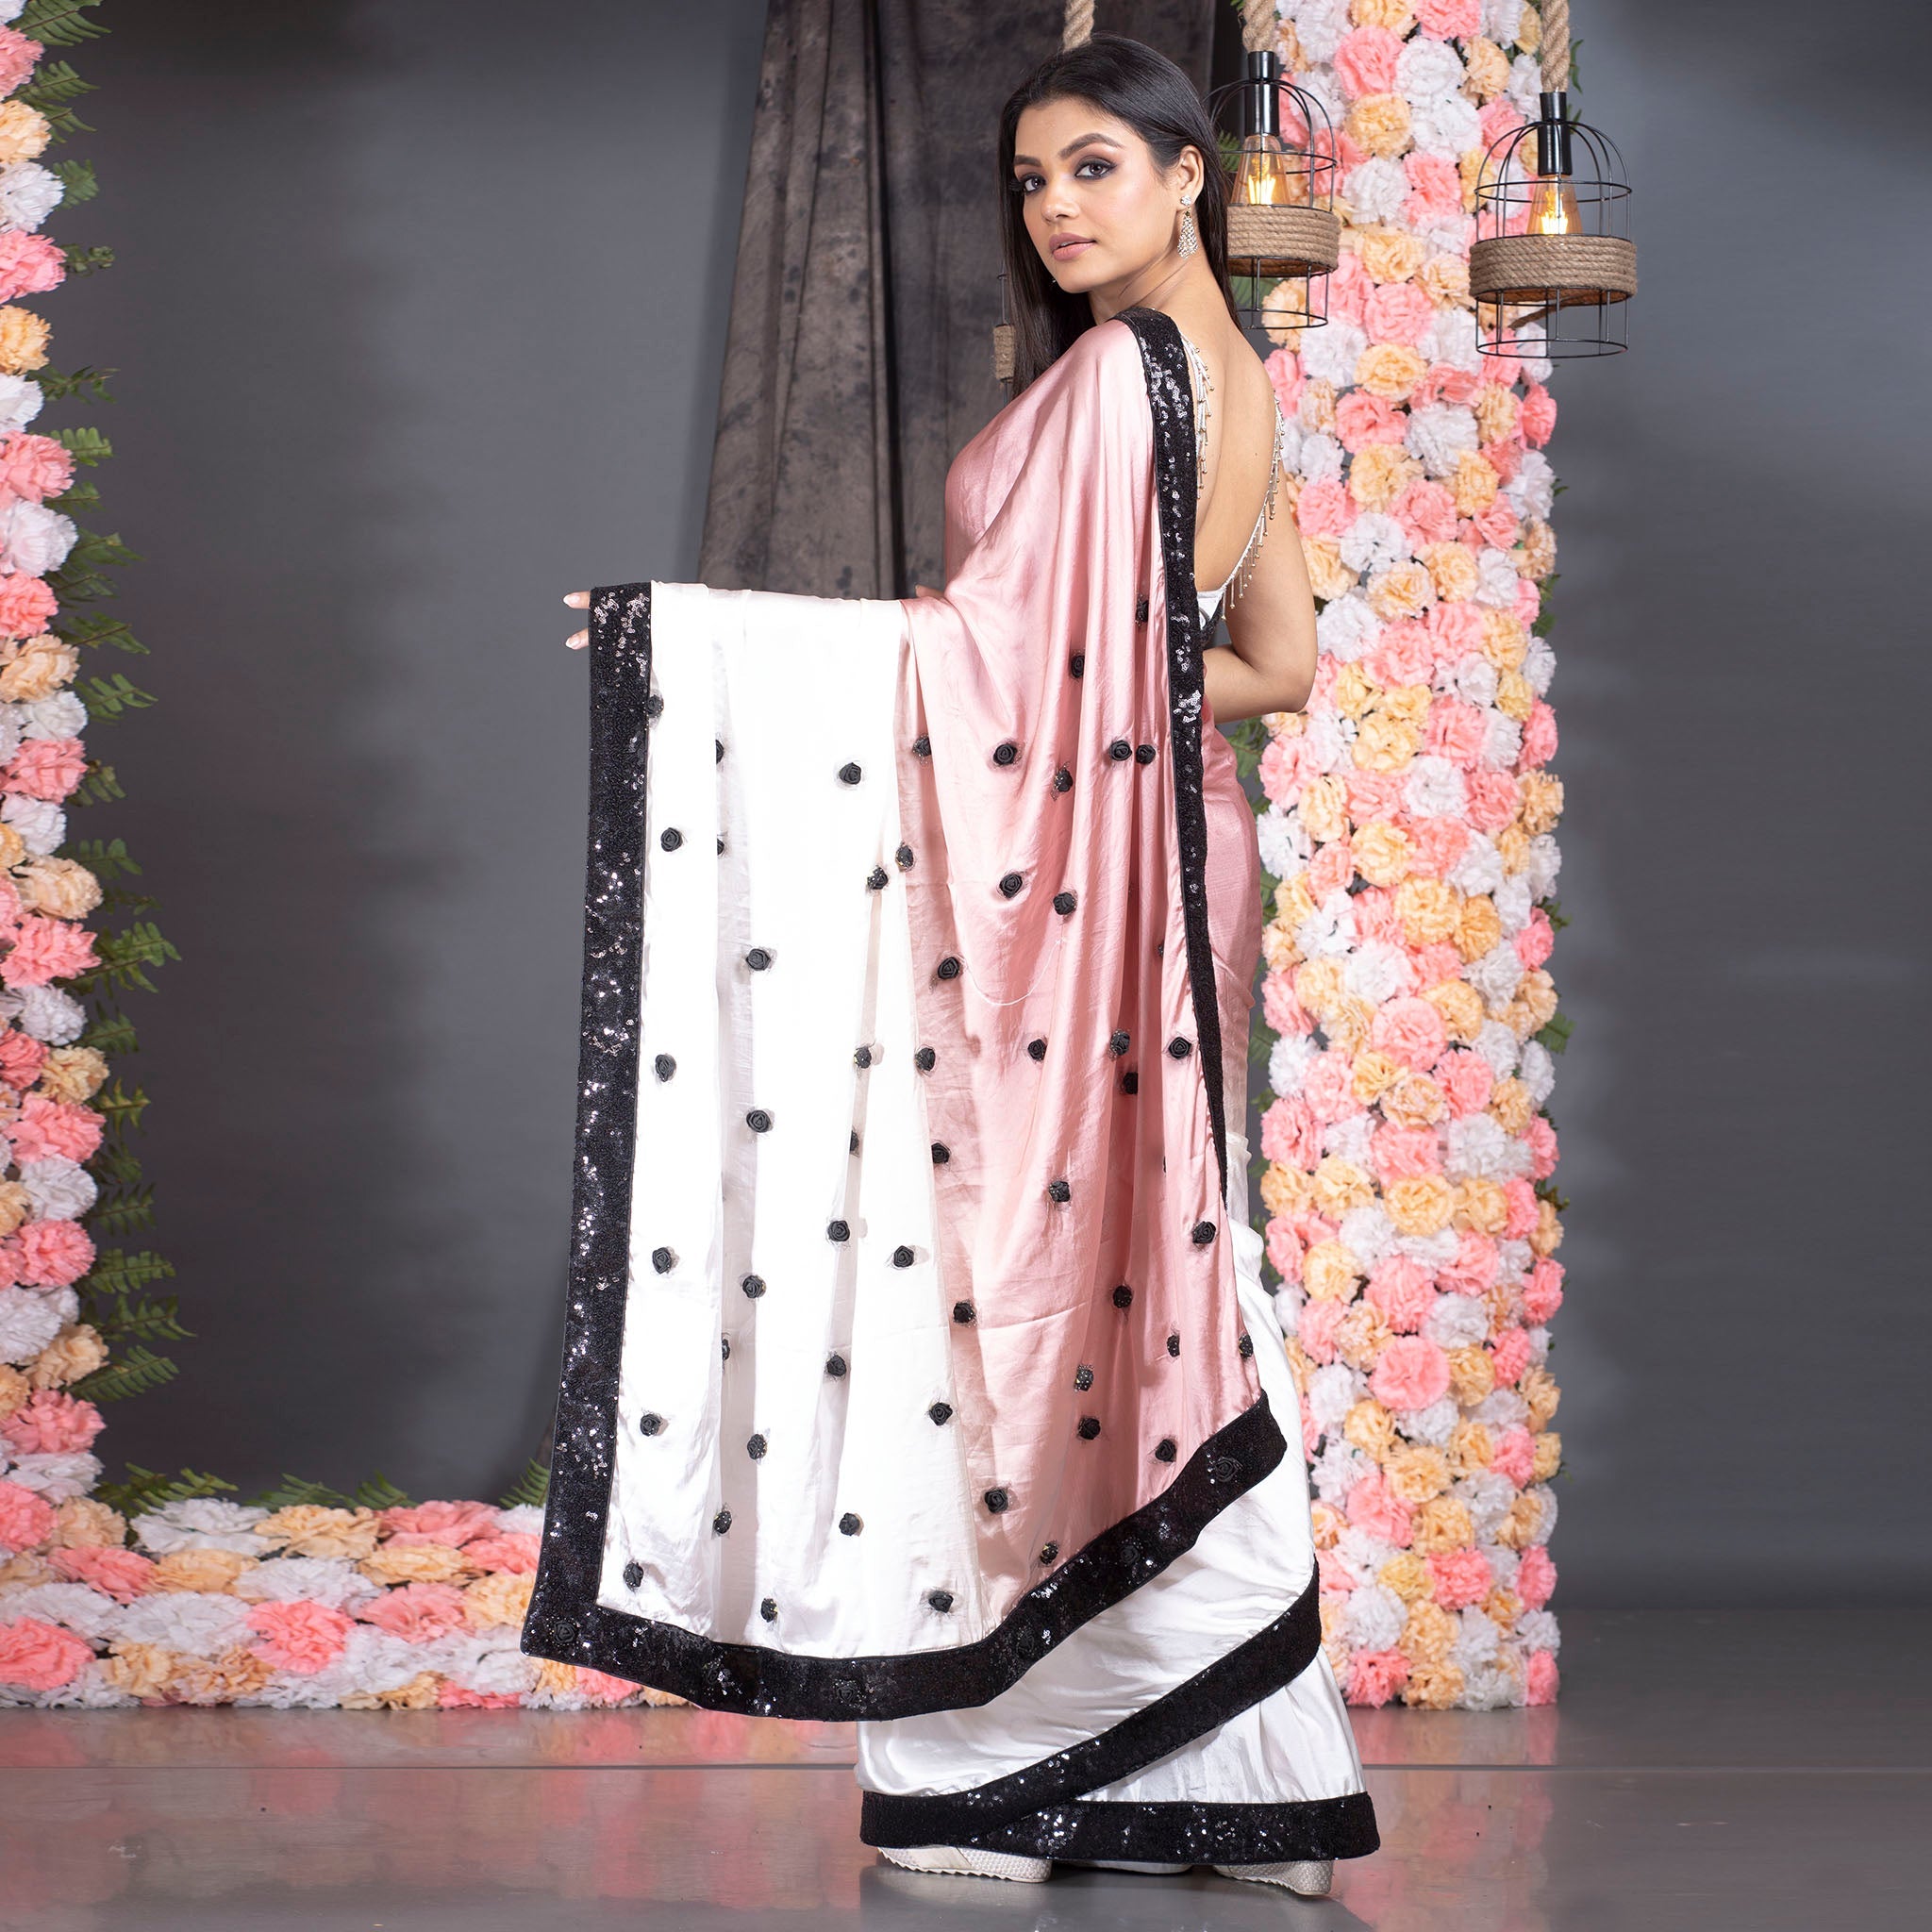 Women's Peach And Offwhite Ombre Satin Saree With Sequin Lace Border And Handmade Rosette Pallu - Boveee